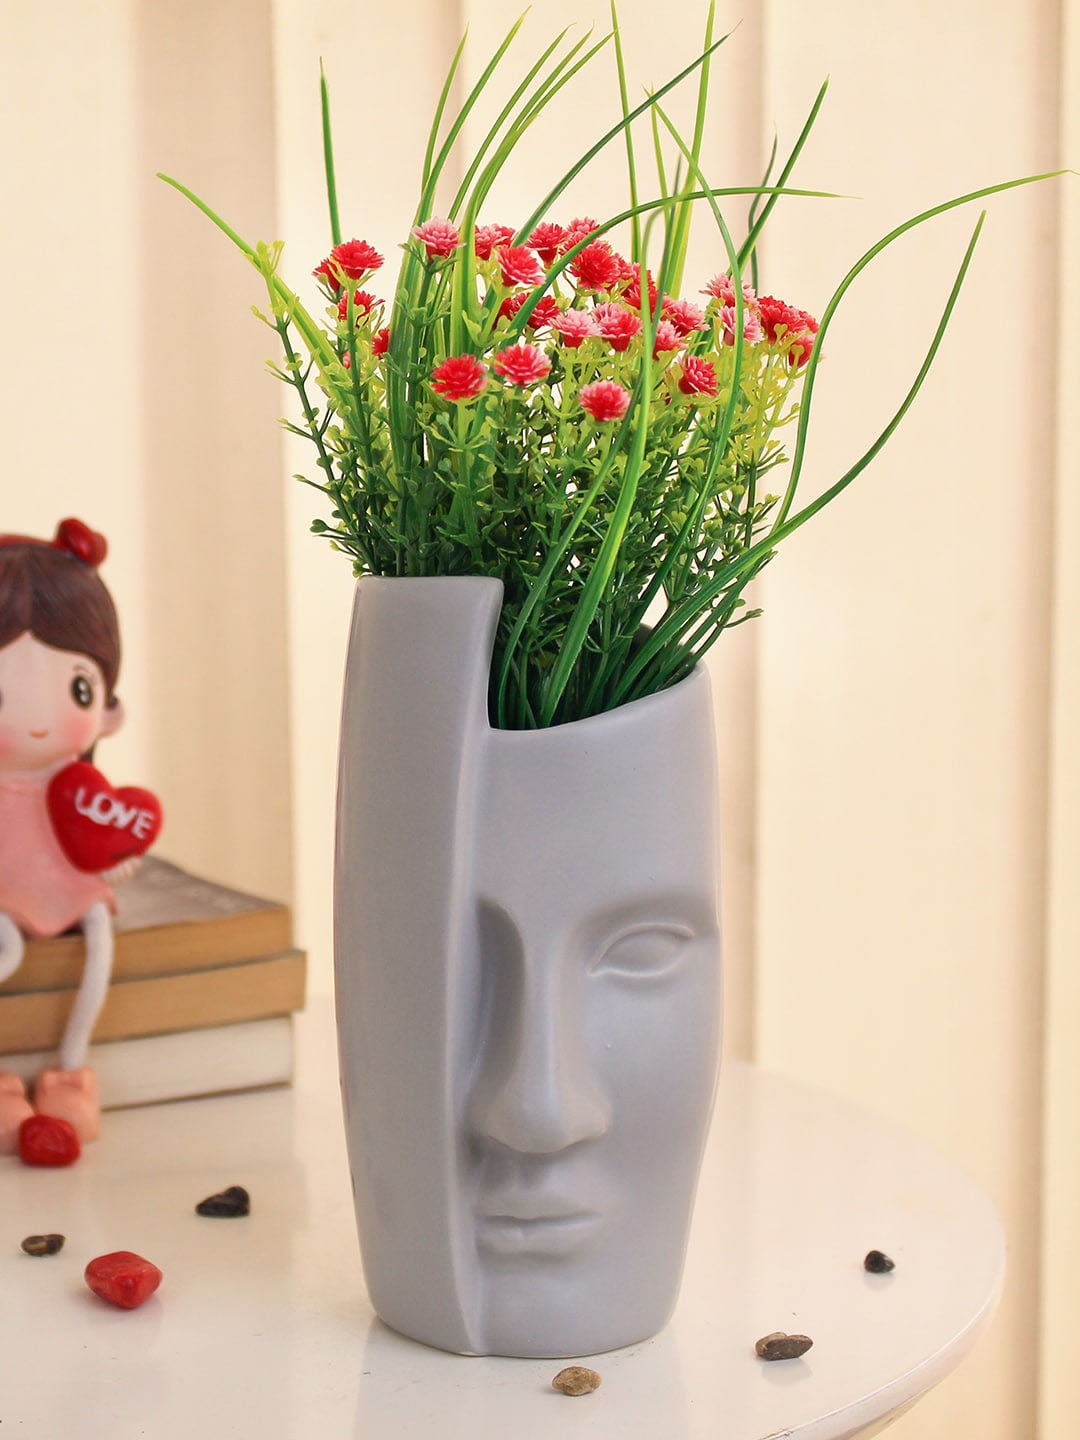 TIED RIBBONS Pink & White Artificial Gypsophila Flowers Plant with Face Pot Vase Price in India